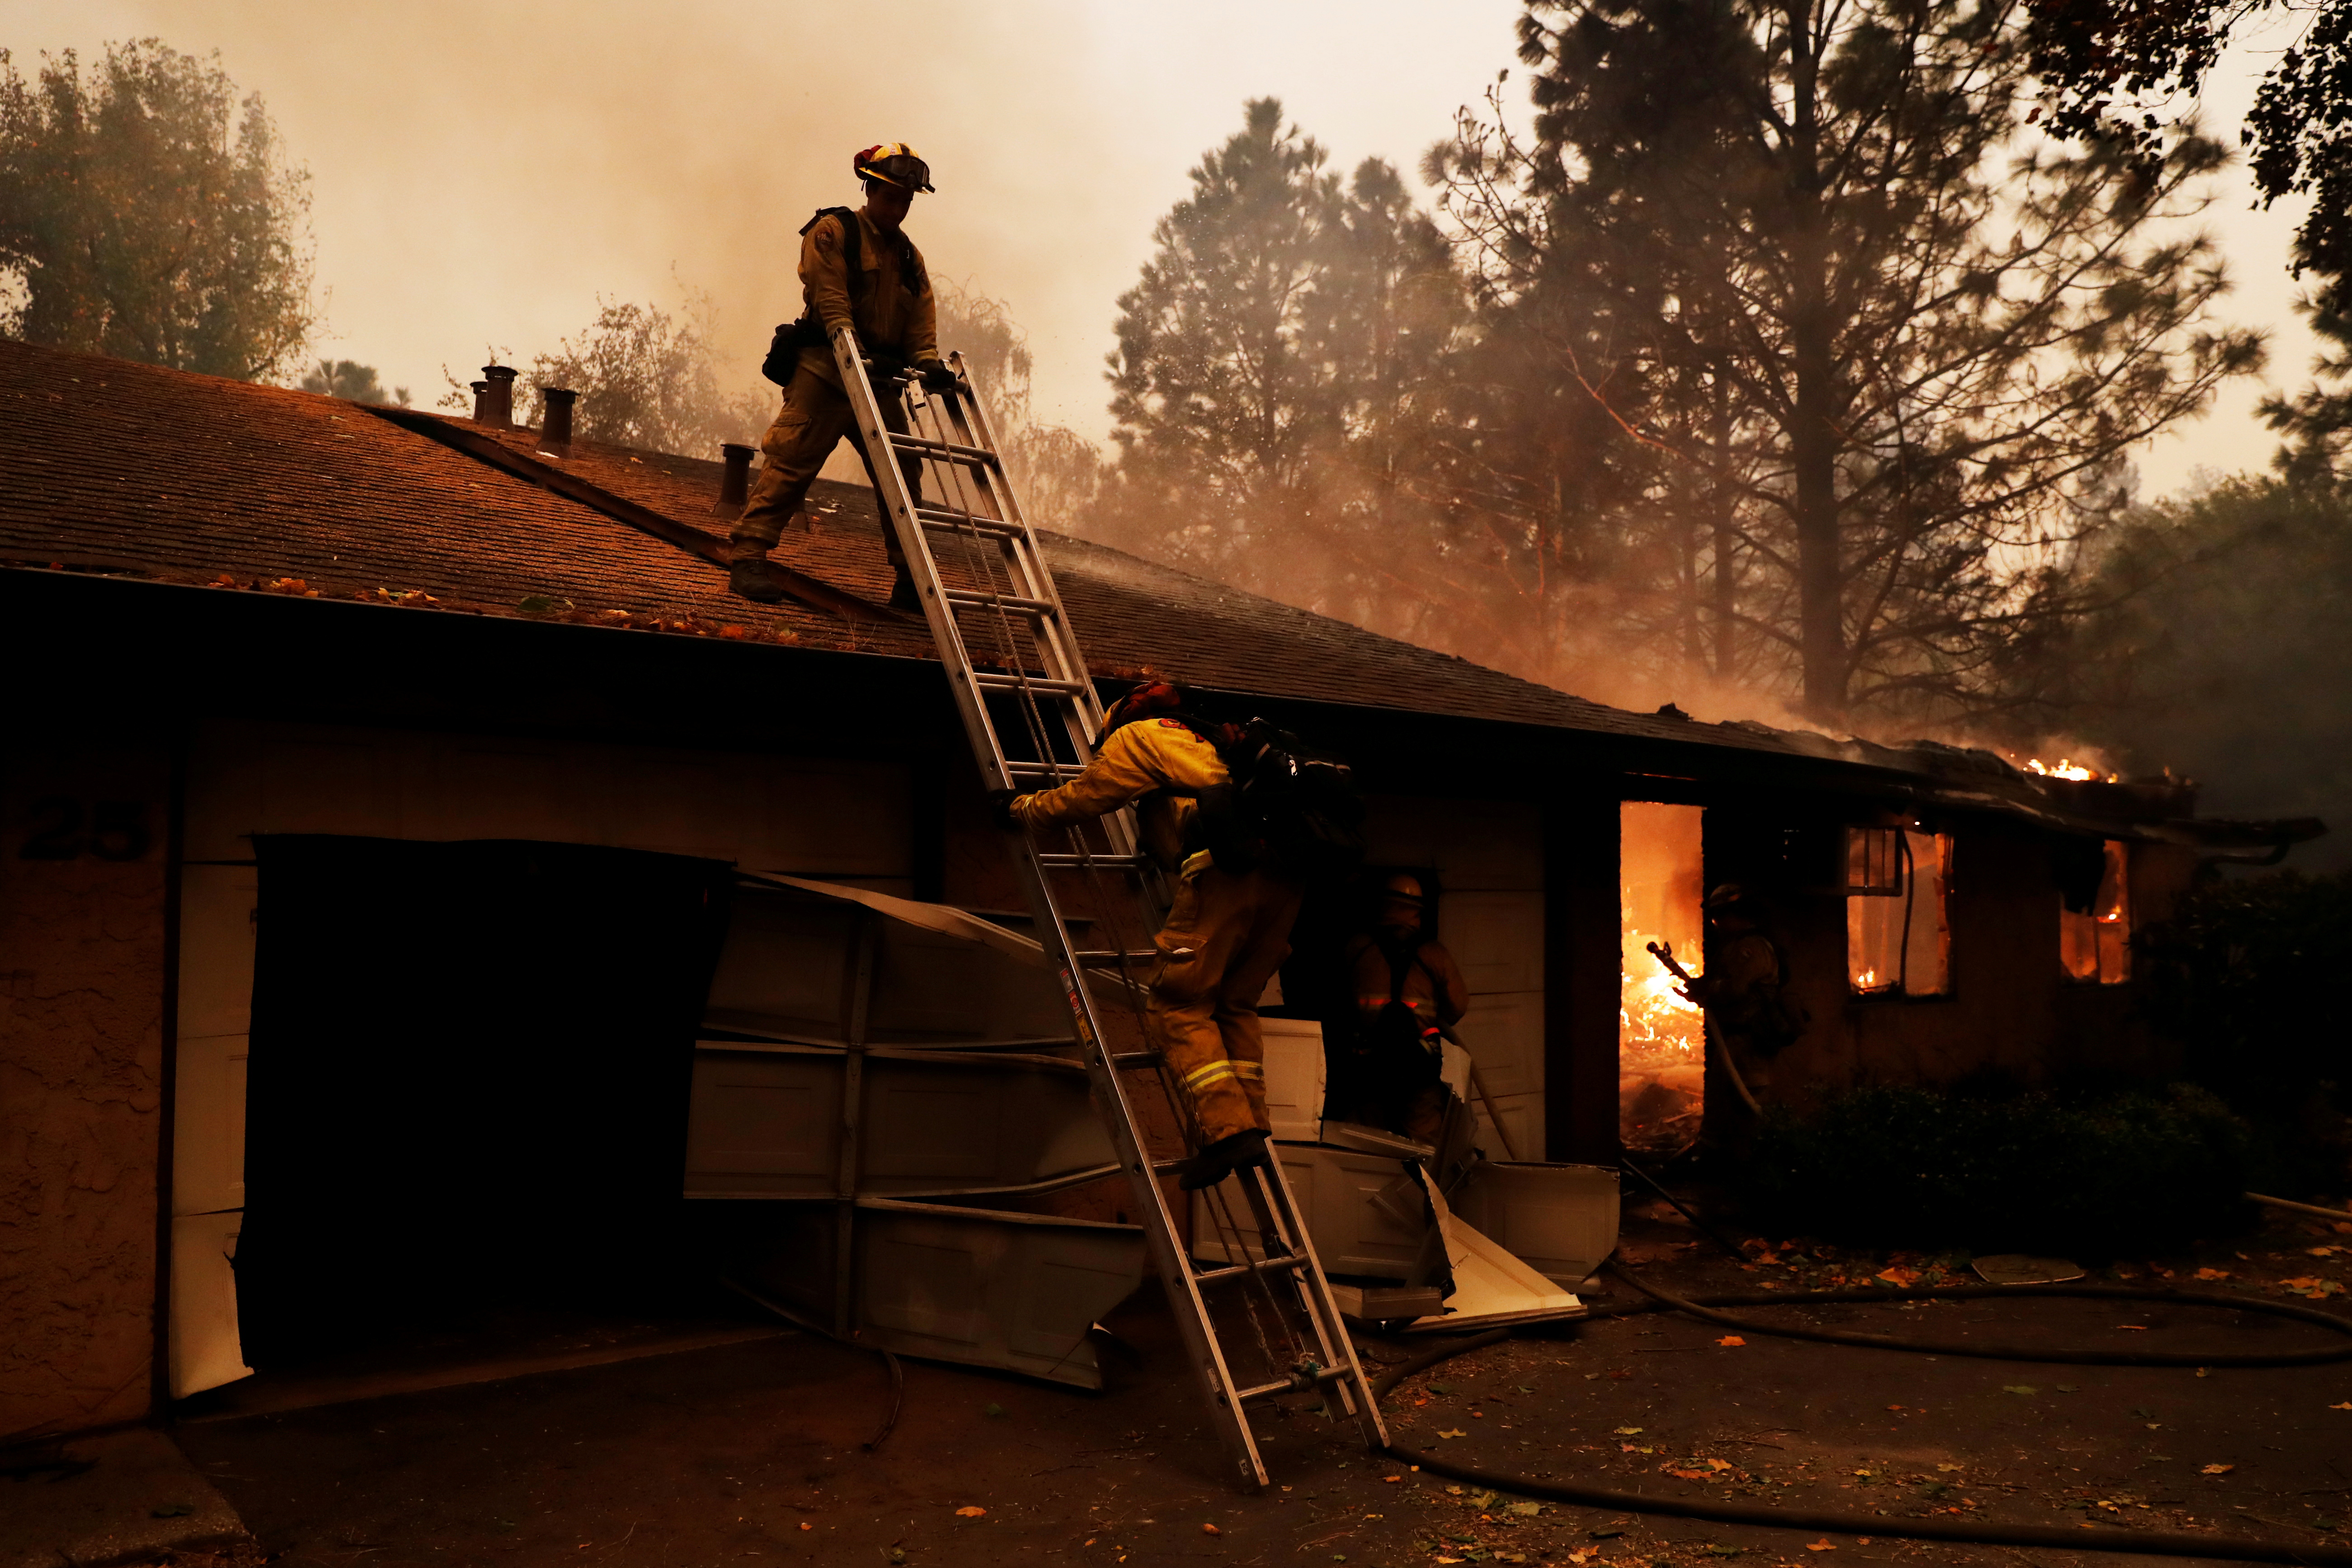 A firefighter climbs a ladder by a burning structure while battling the Camp Fire in Paradise, California, U.S., November 9, 2018. REUTERS/Stephen Lam